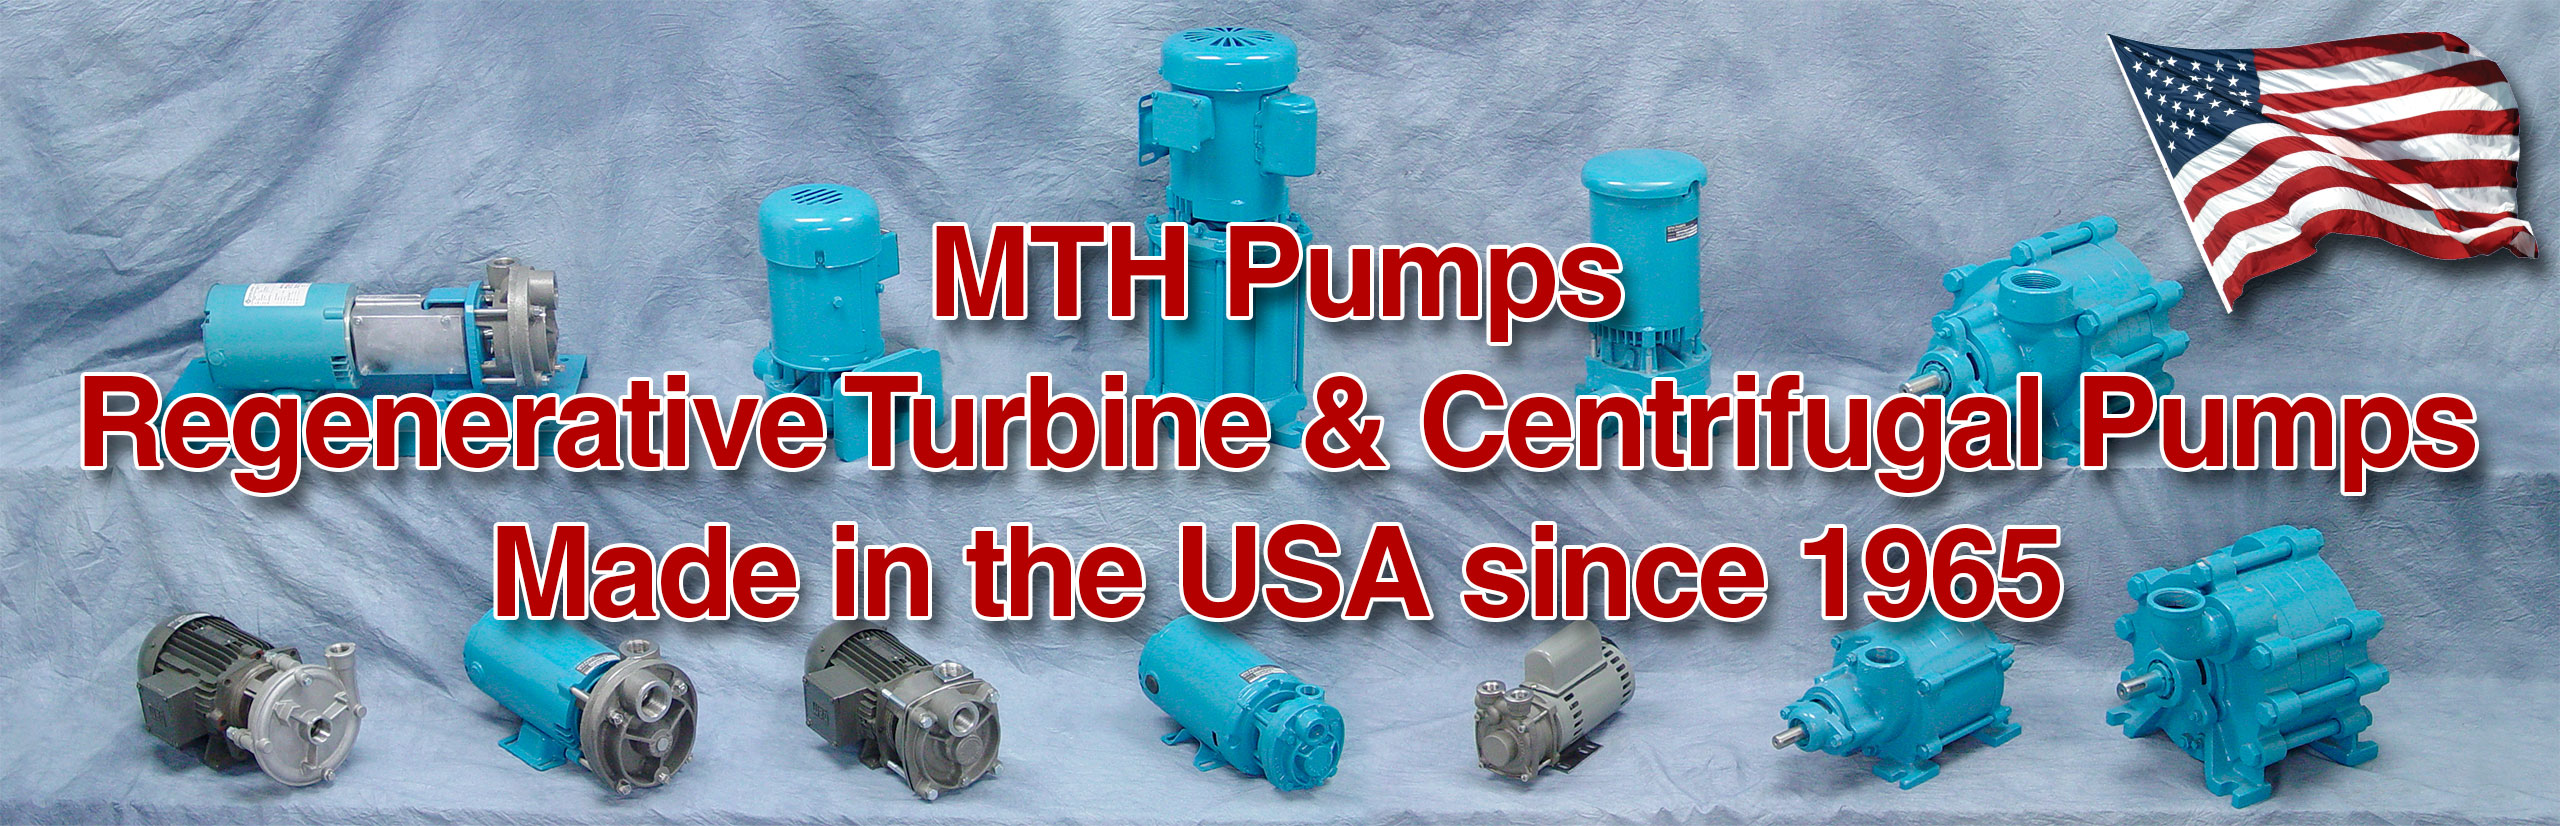 MTH Pumps Standard Products Line